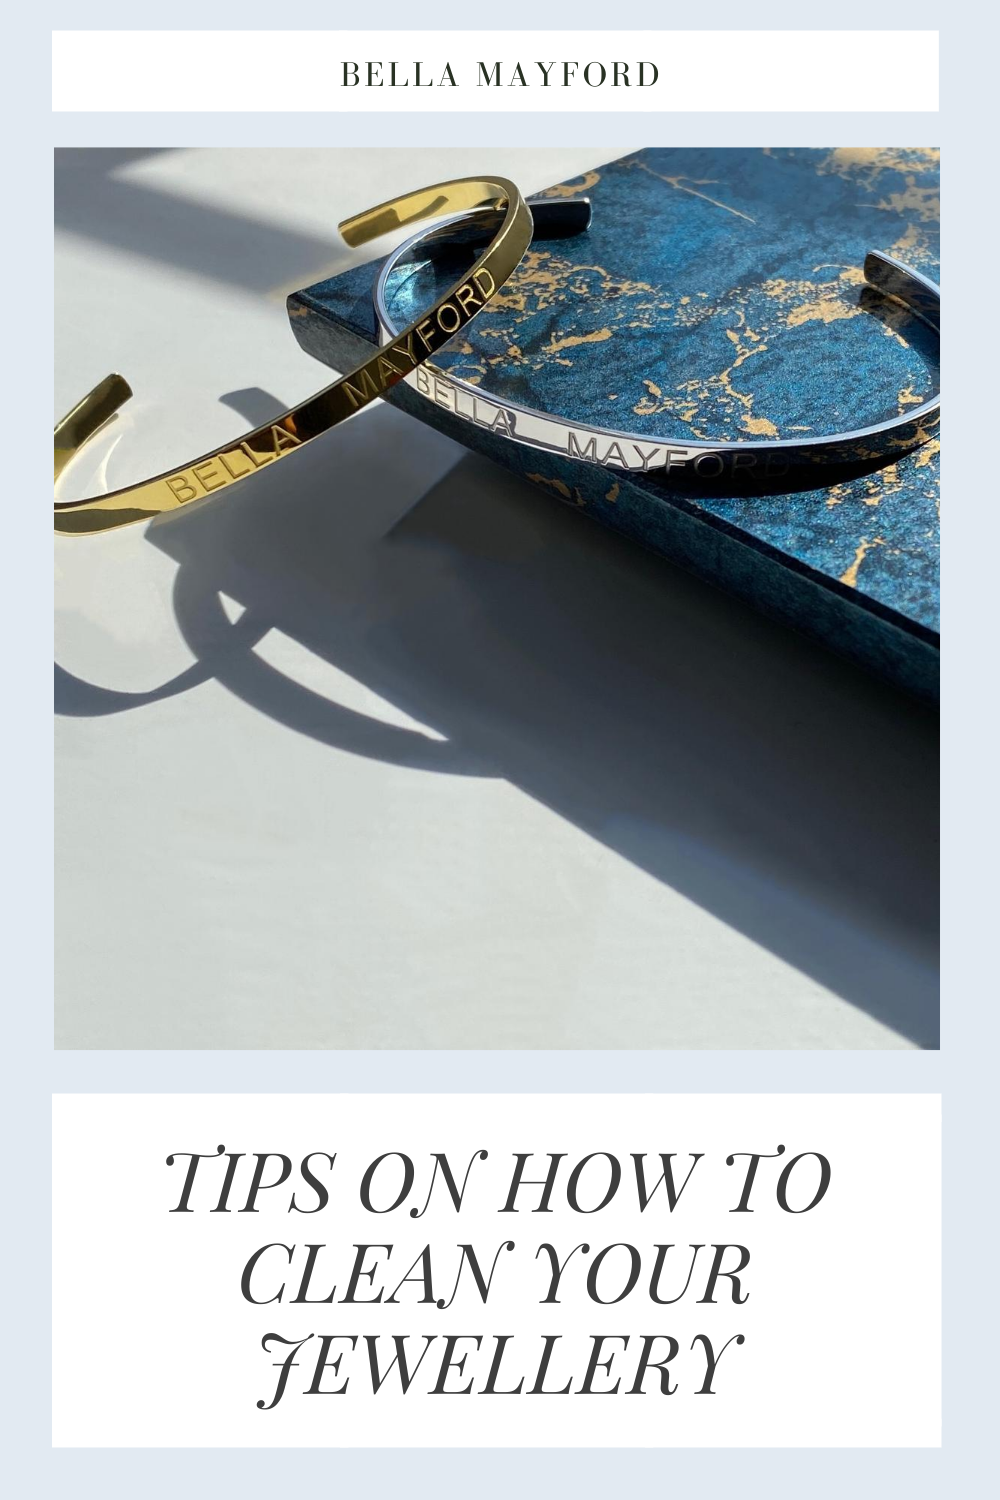 HOW TO CLEAN JEWELLERY - Bella Mayford Tips